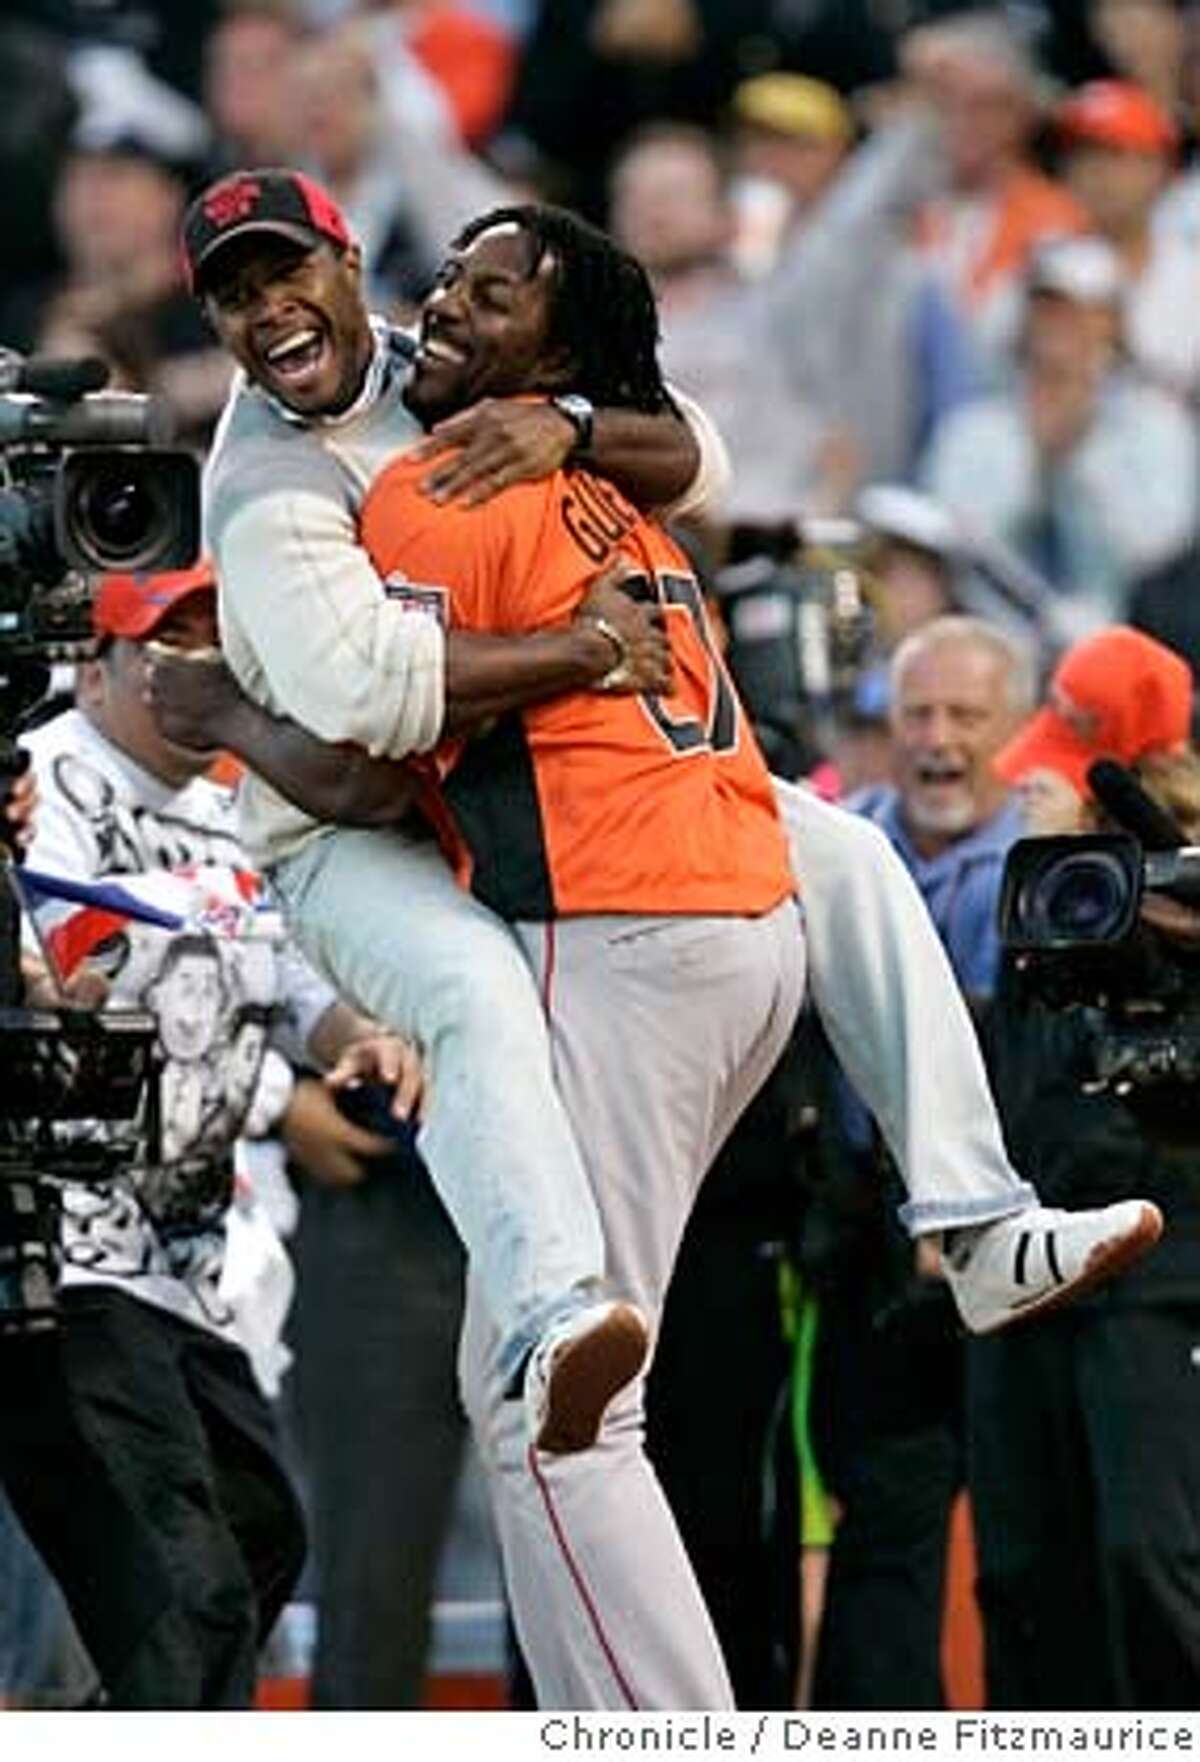 Vladimir Guerrero's cousin Wilfredo Paulino congratulates Guerrero after he won the Home Run Derby. Home Run Derby at AT&T Park in San Francisco, CA, on Monday, July, 9 2007. photo taken: 07/09/2007 Deanne Fitzmaurice / The Chronicle ** (cq) MANDATORY CREDIT FOR PHOTOG AND SF CHRONICLE/NO SALES-MAGS OUT